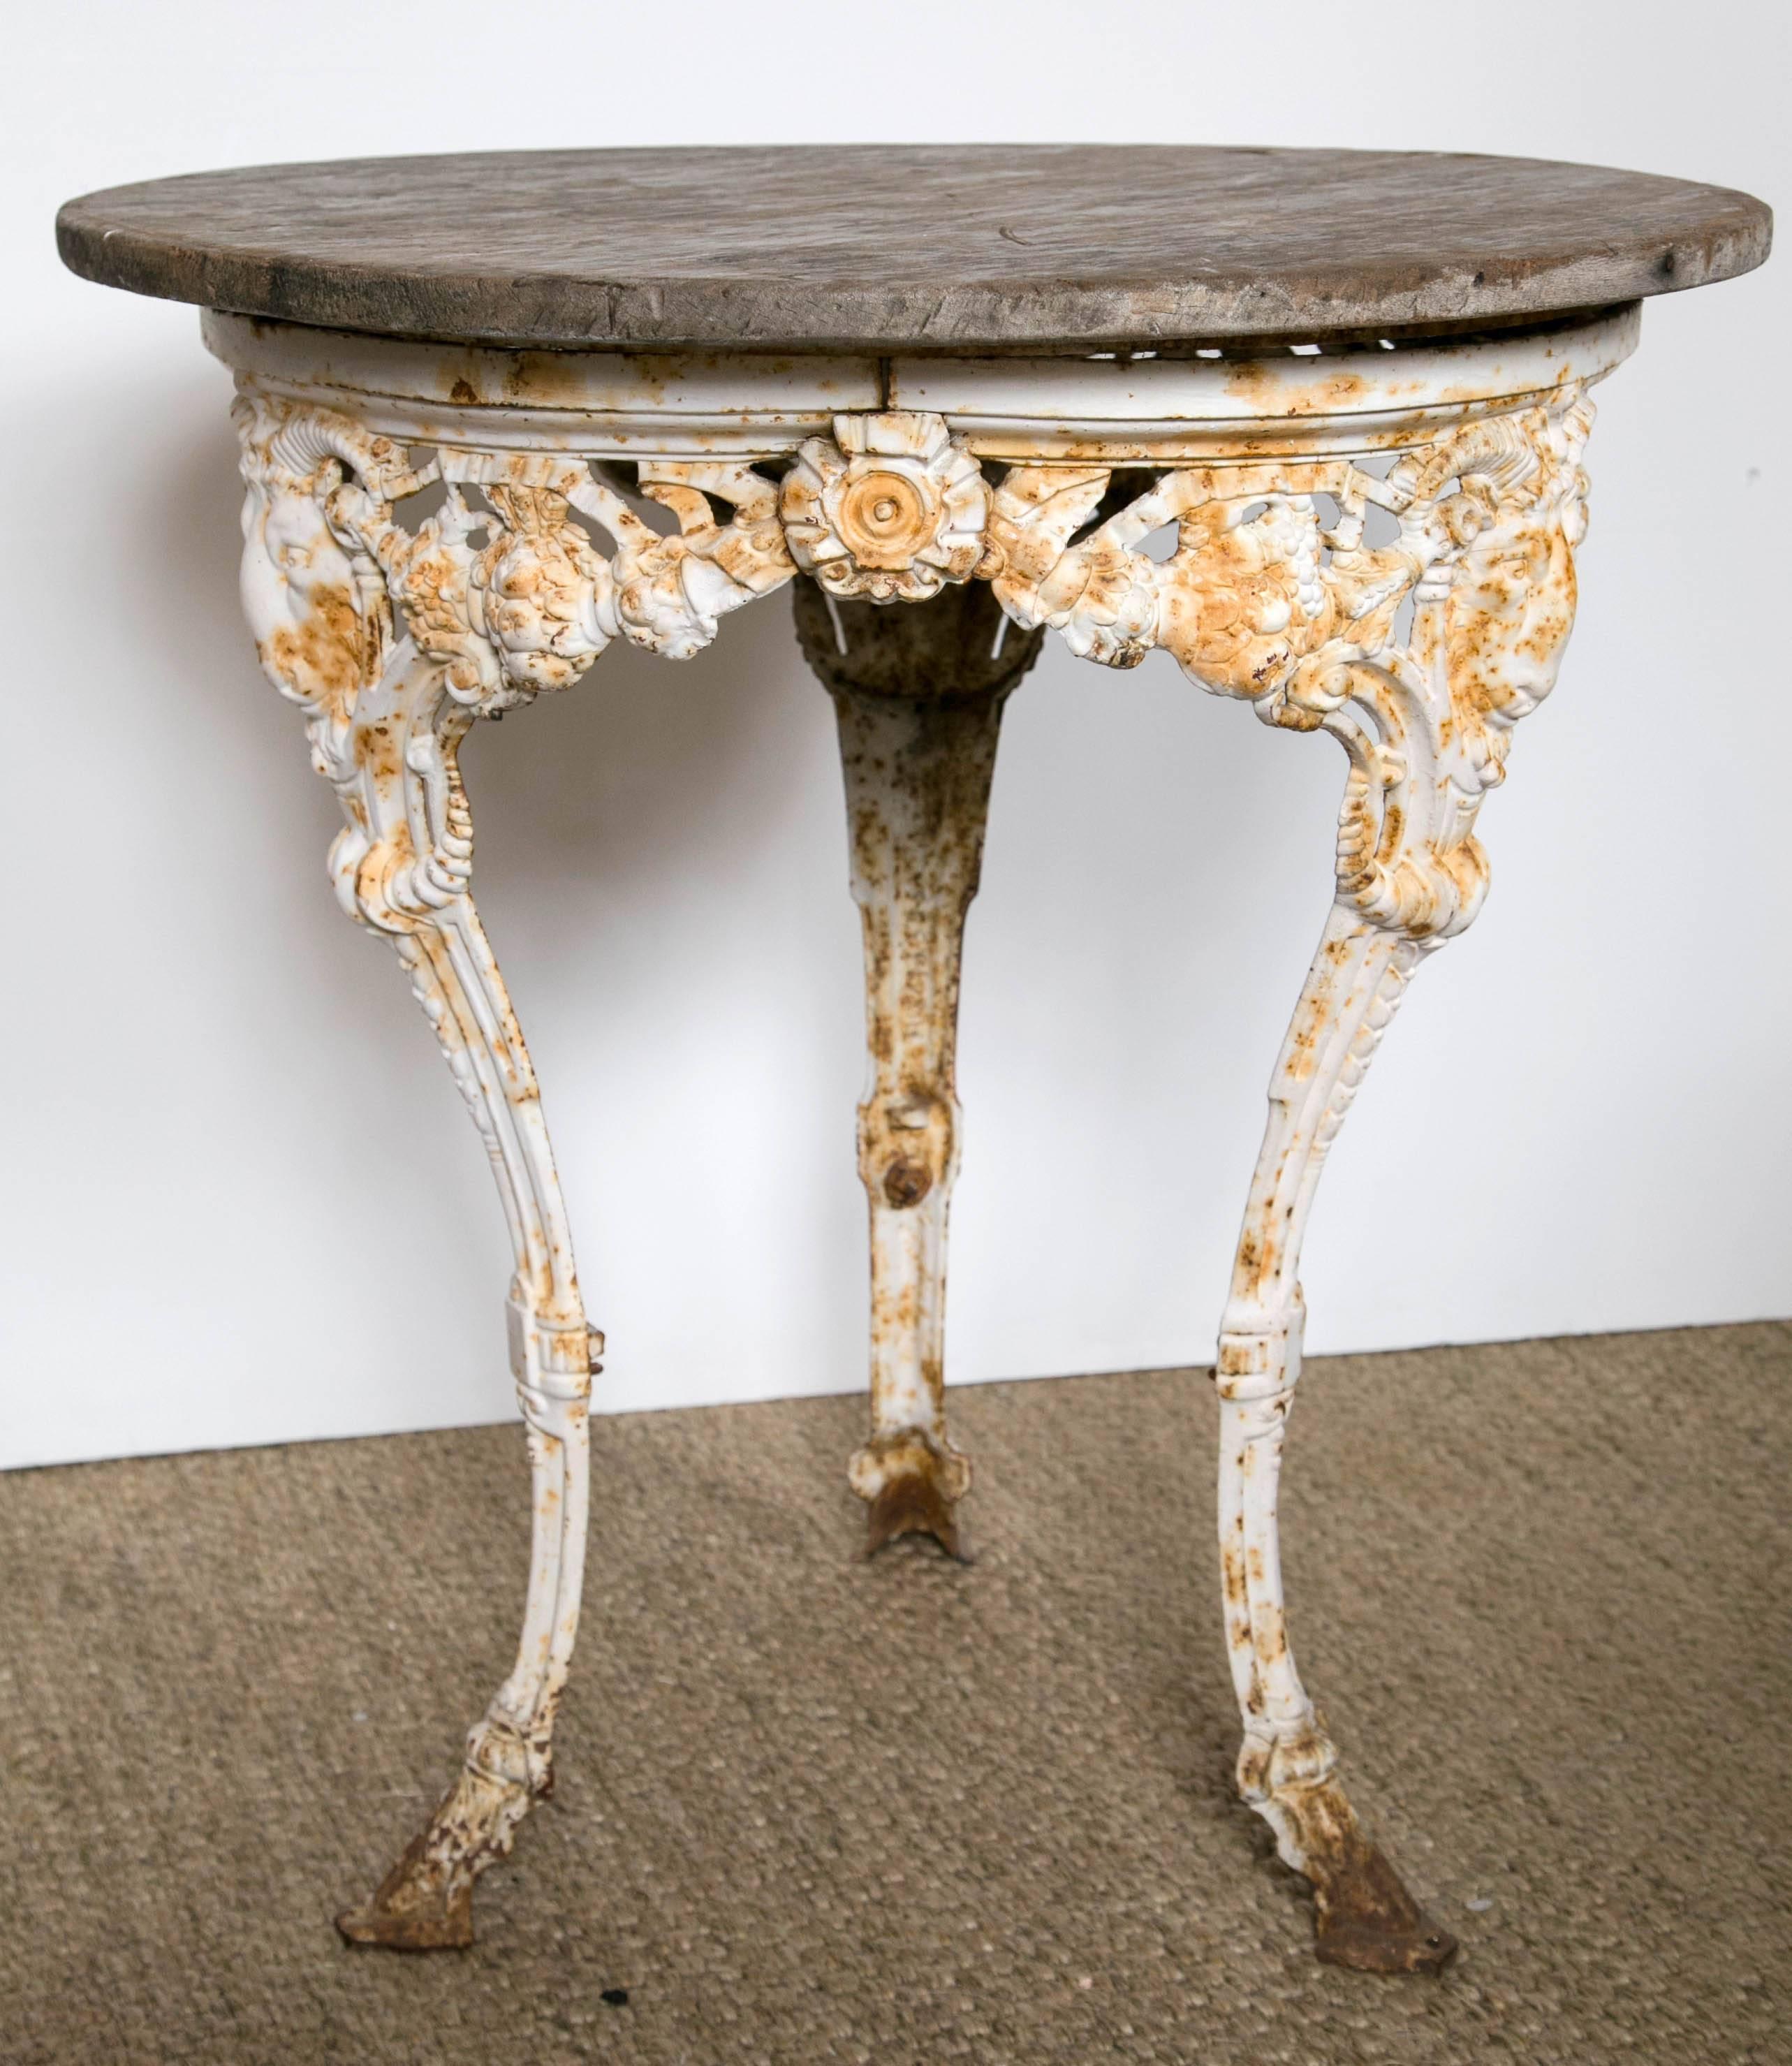 Vintage English pub table. Three cast iron legs feature decorative scroll work and ram heads. White finish and some patina on the iron. Wood top shows use appropriate wear.